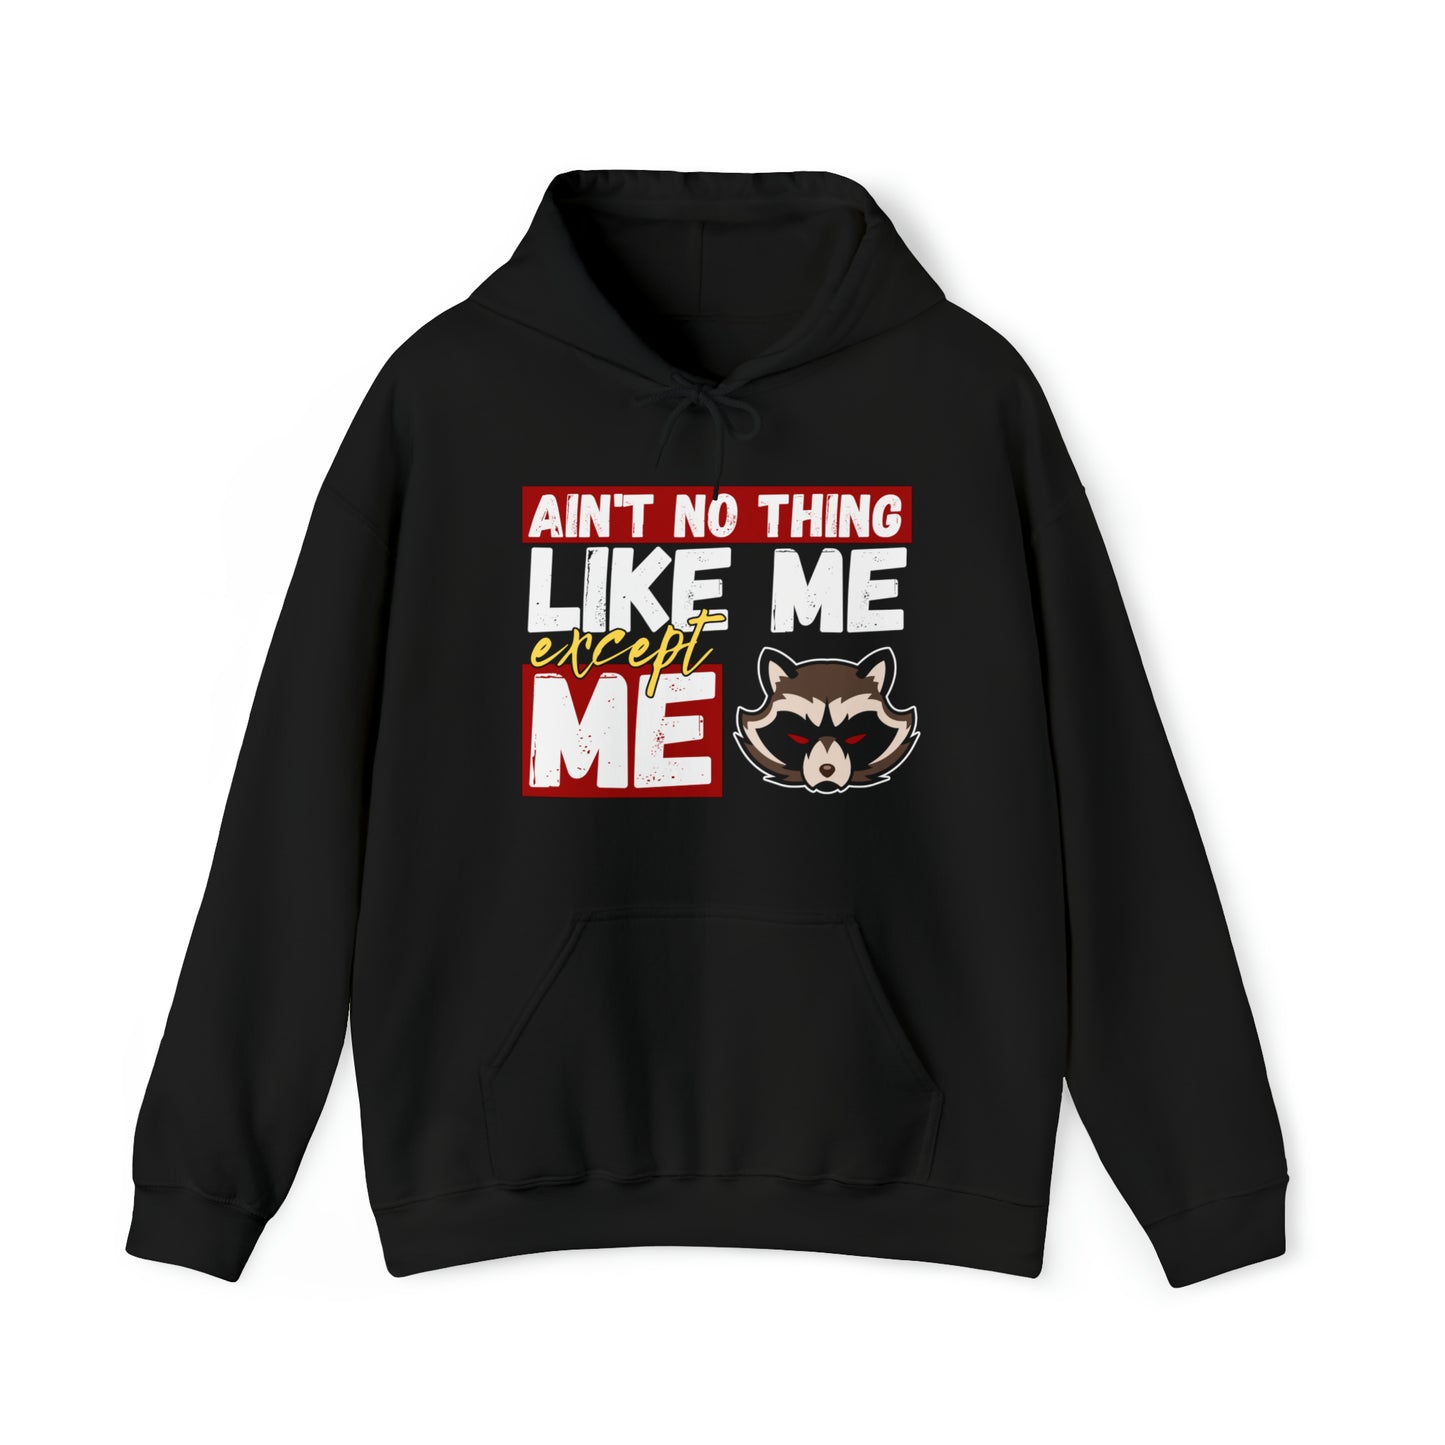 Ain't No Thing Like Me, Except Me - Rocket Raccoon Quote Hooded Sweatshirt (Unisex)